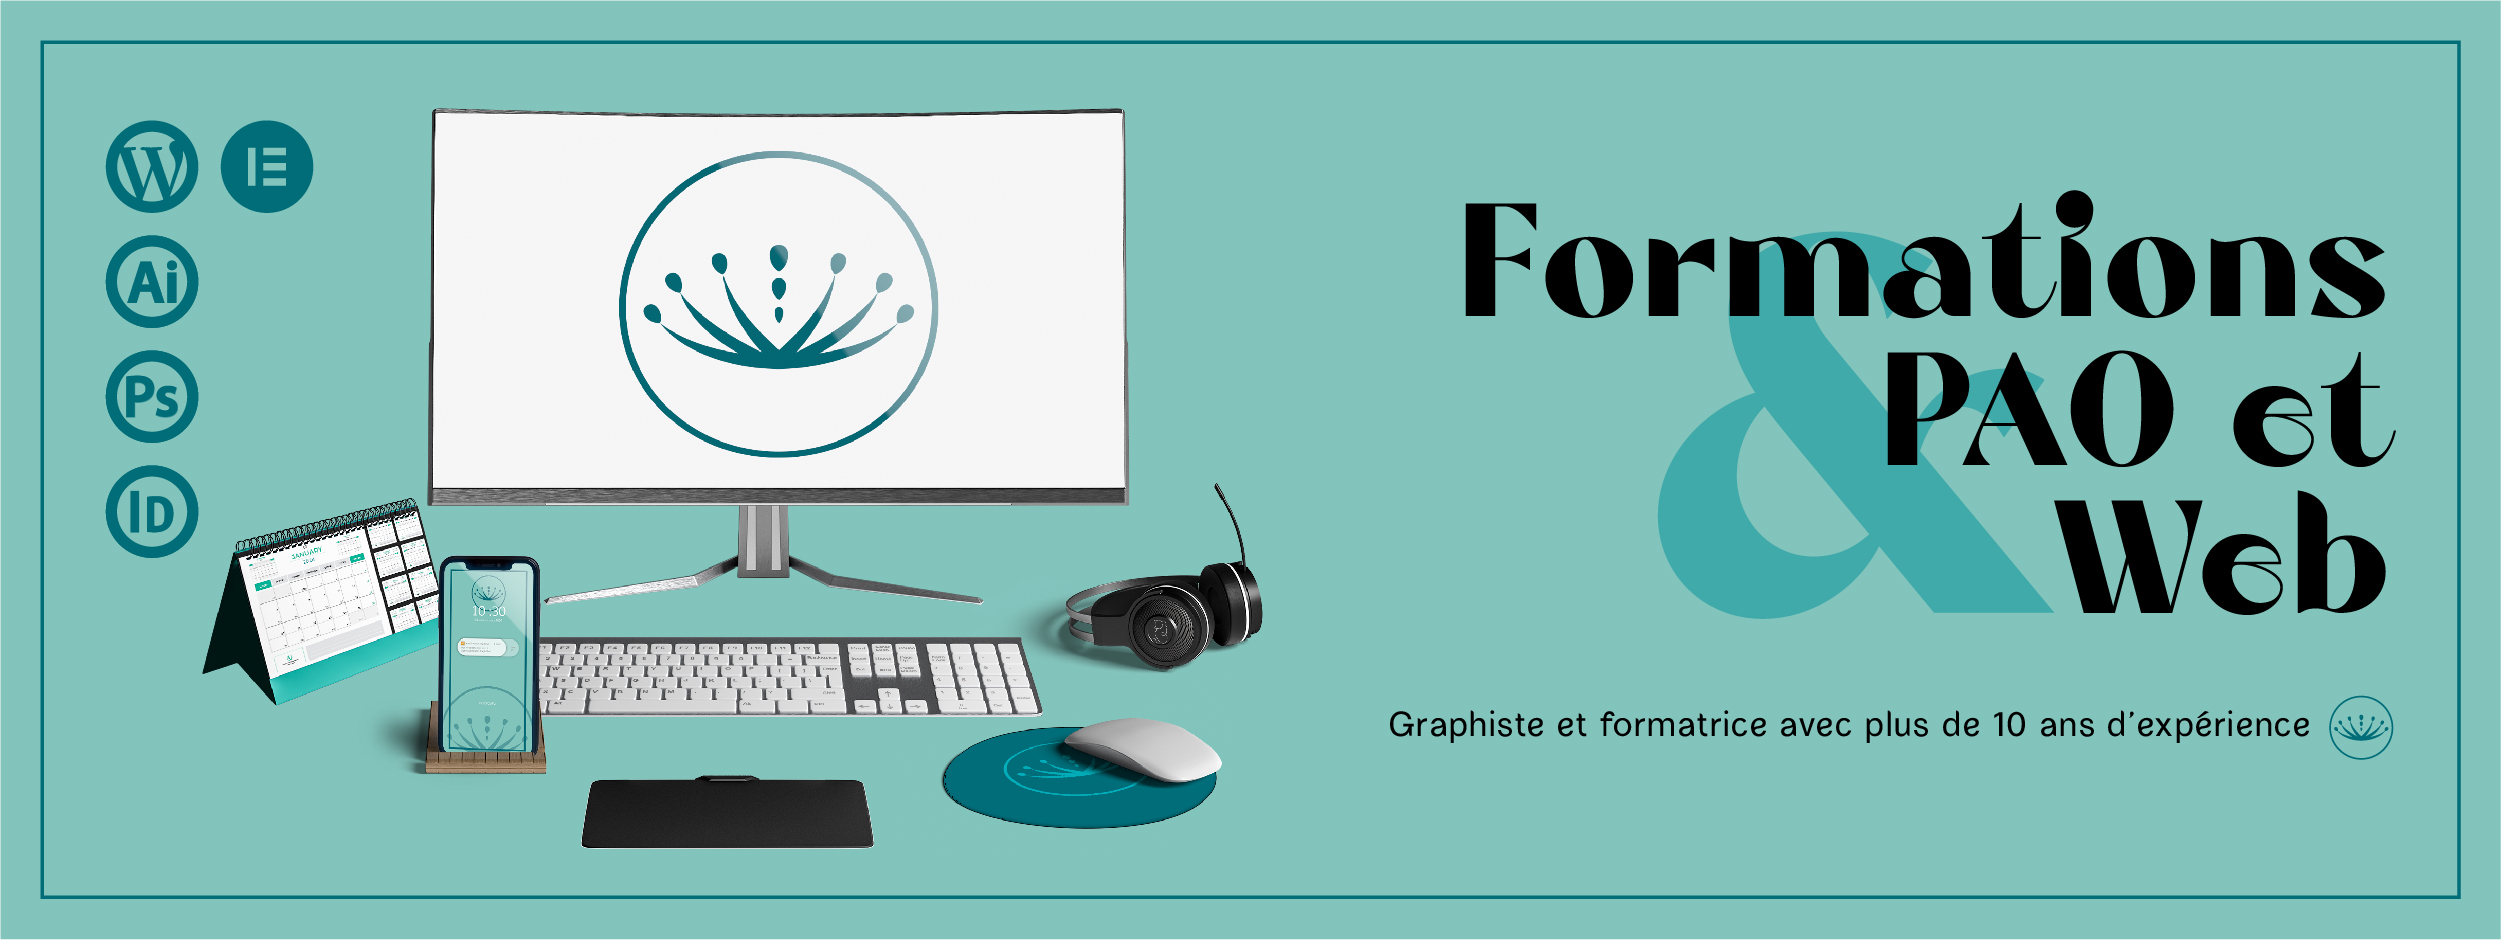 Formations Pao et Web